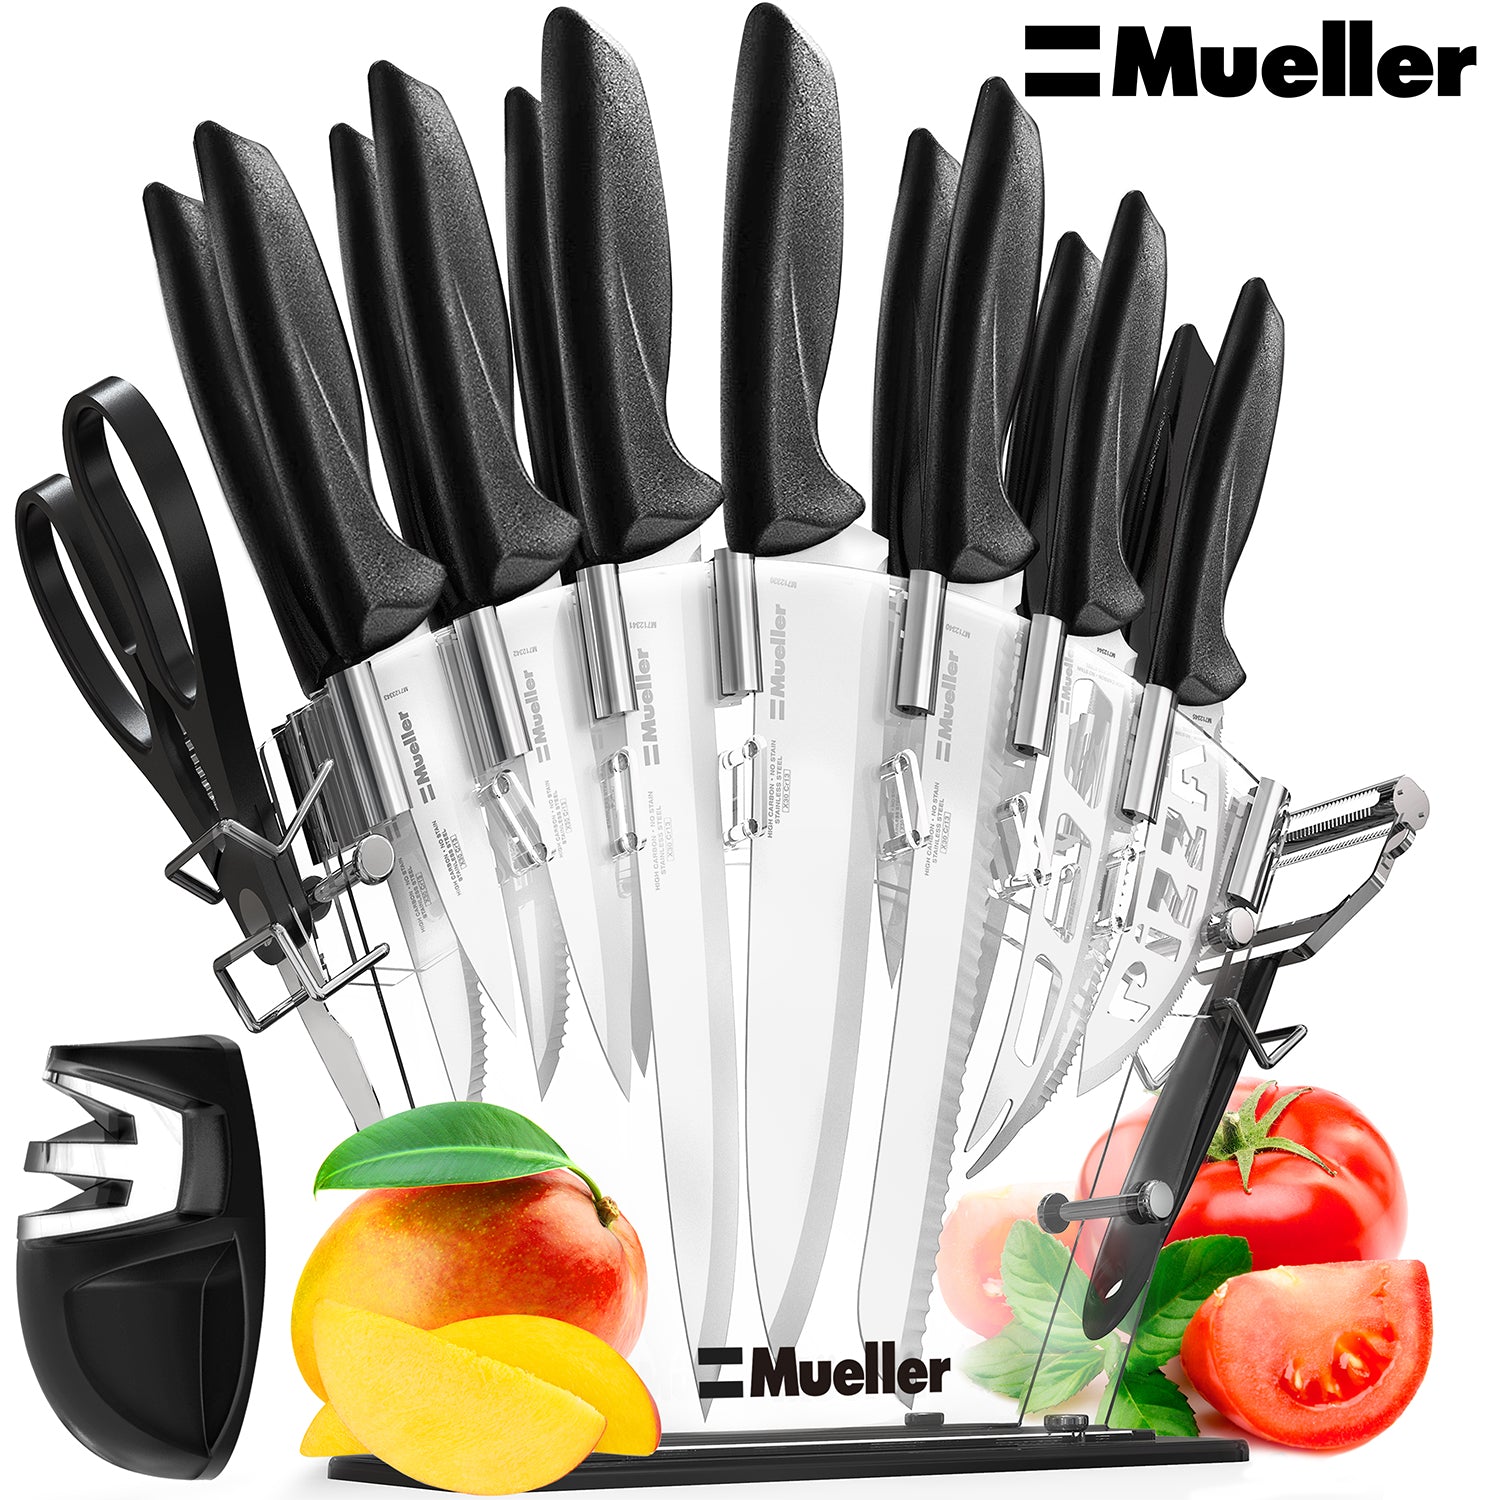 8 Pc Surgical Stainless Steel Knives